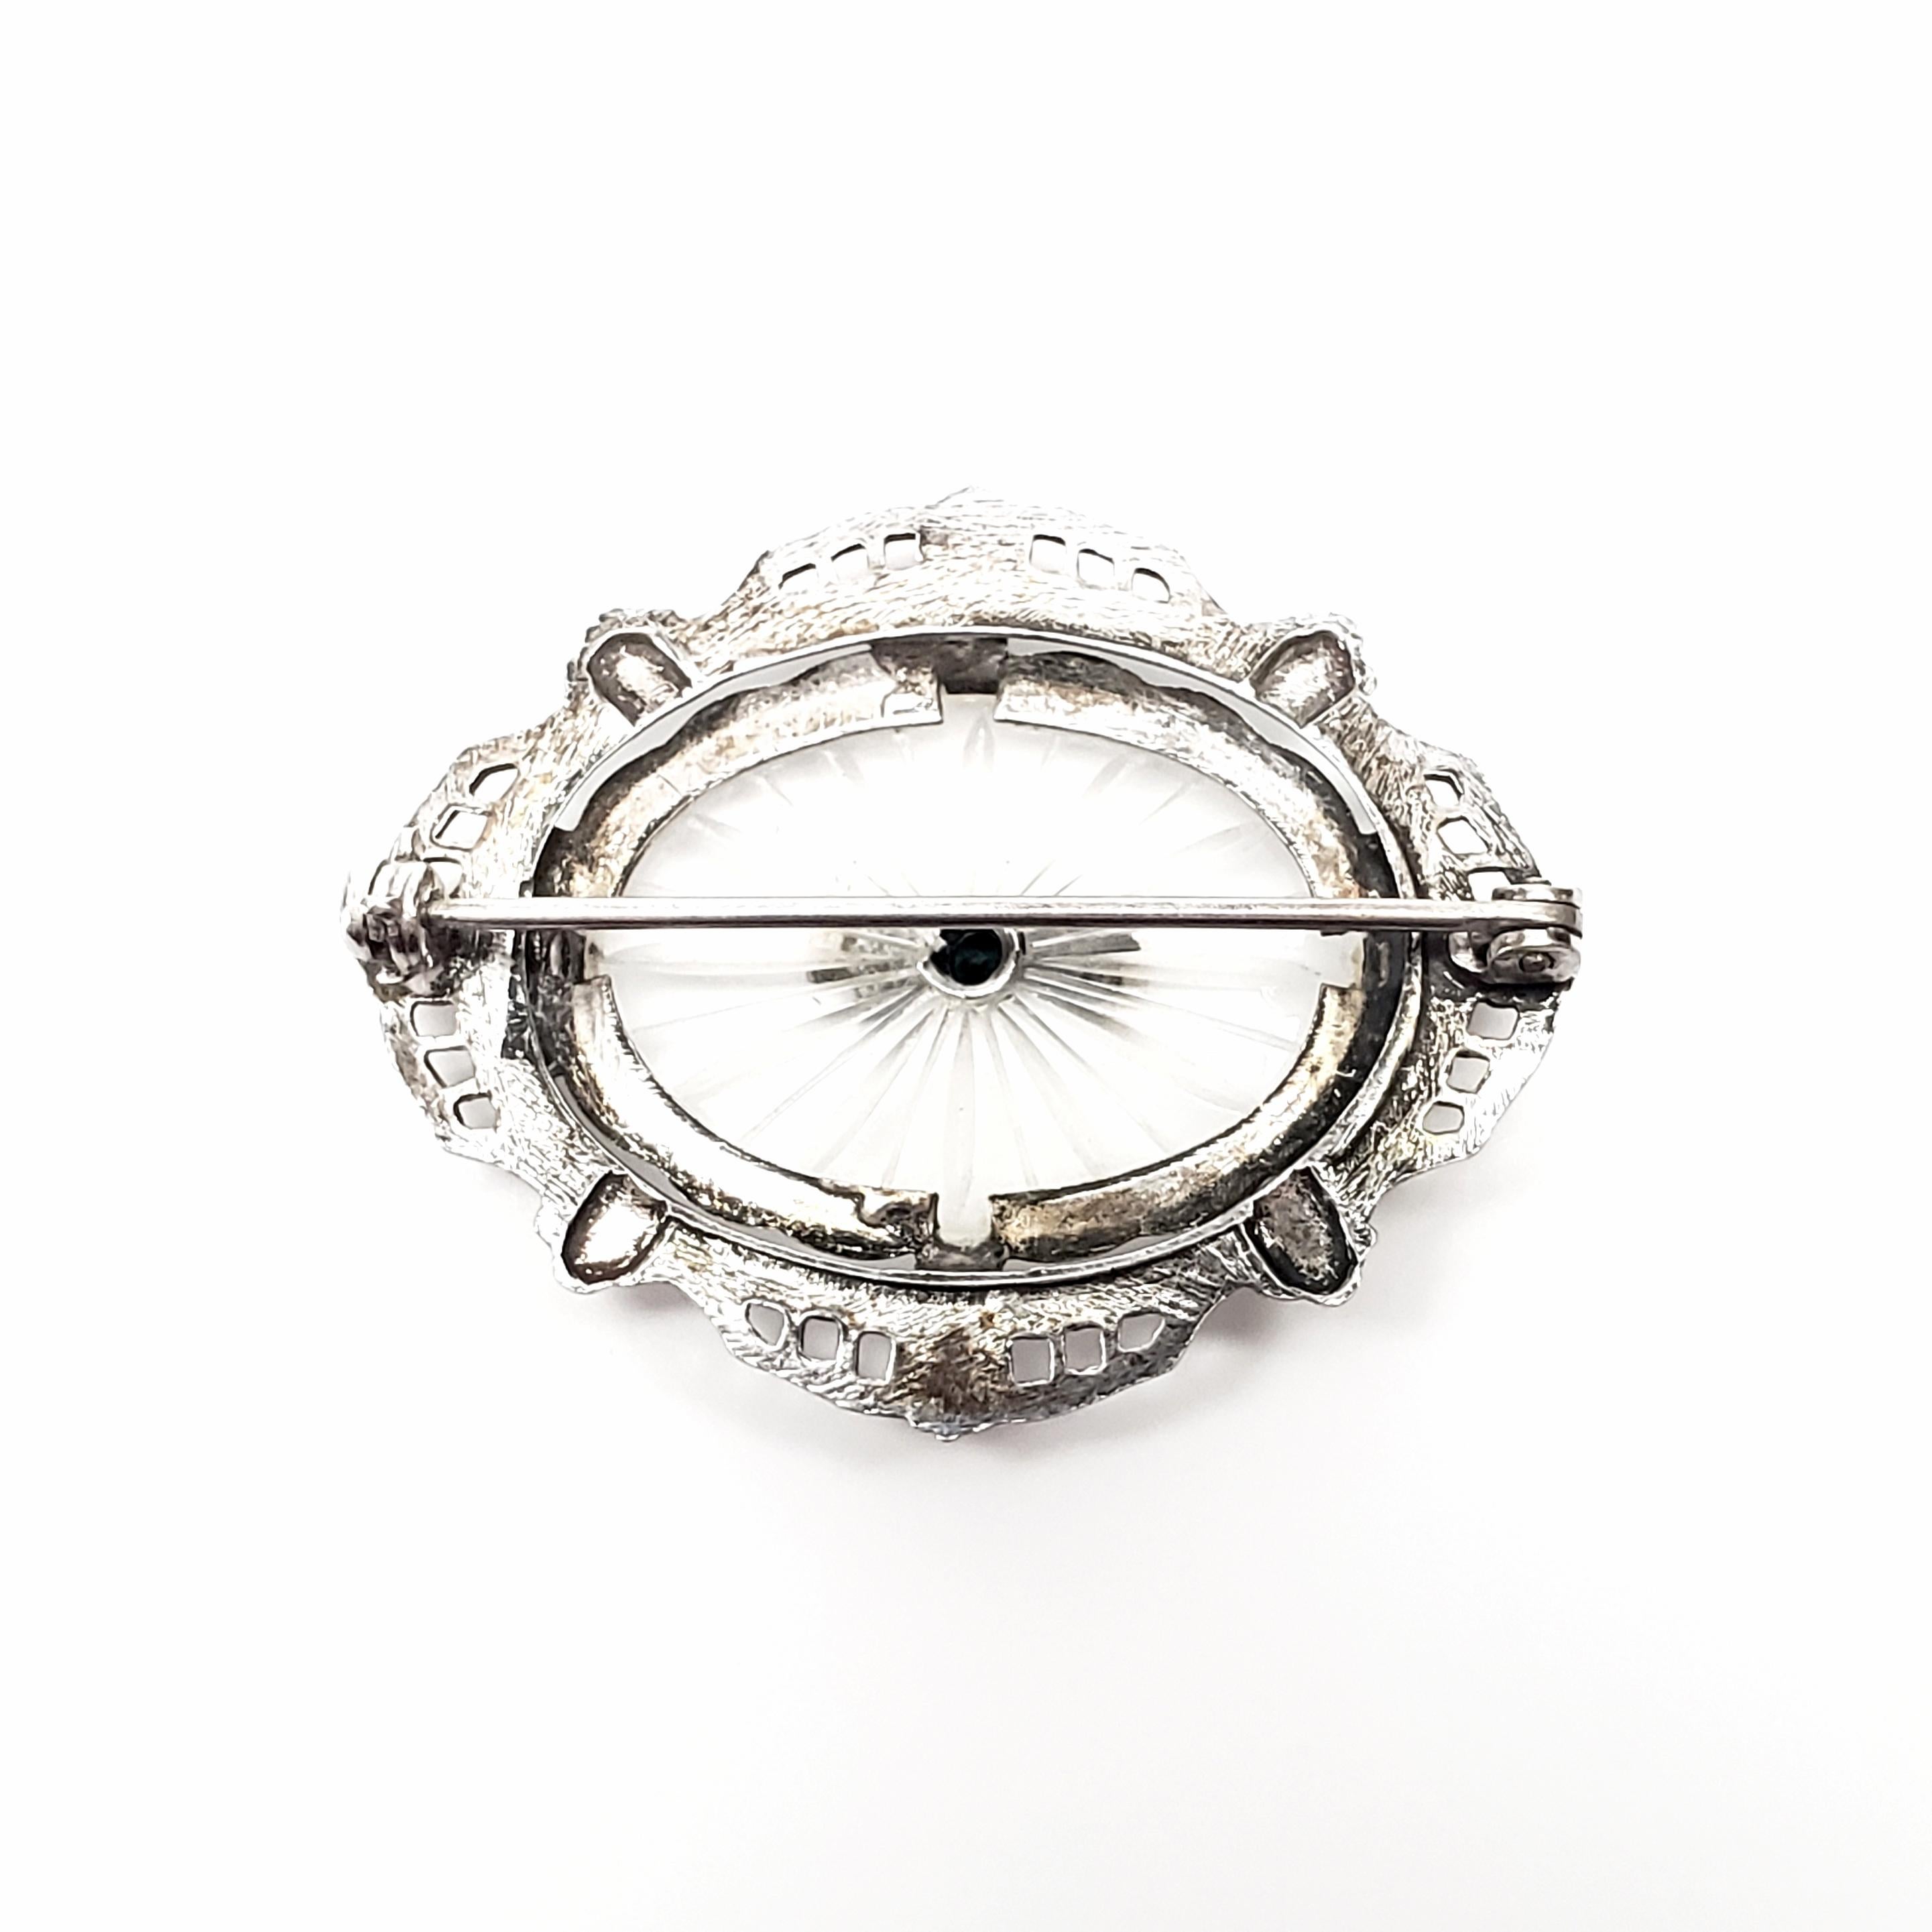 Vintage sterling silver diamond and camphor glass pin.

Beautiful art deco design features oval camphor glass with a starburst design and a small round diamond, bezel set in an ornate sterling silver frame.

Measures 1 1/4